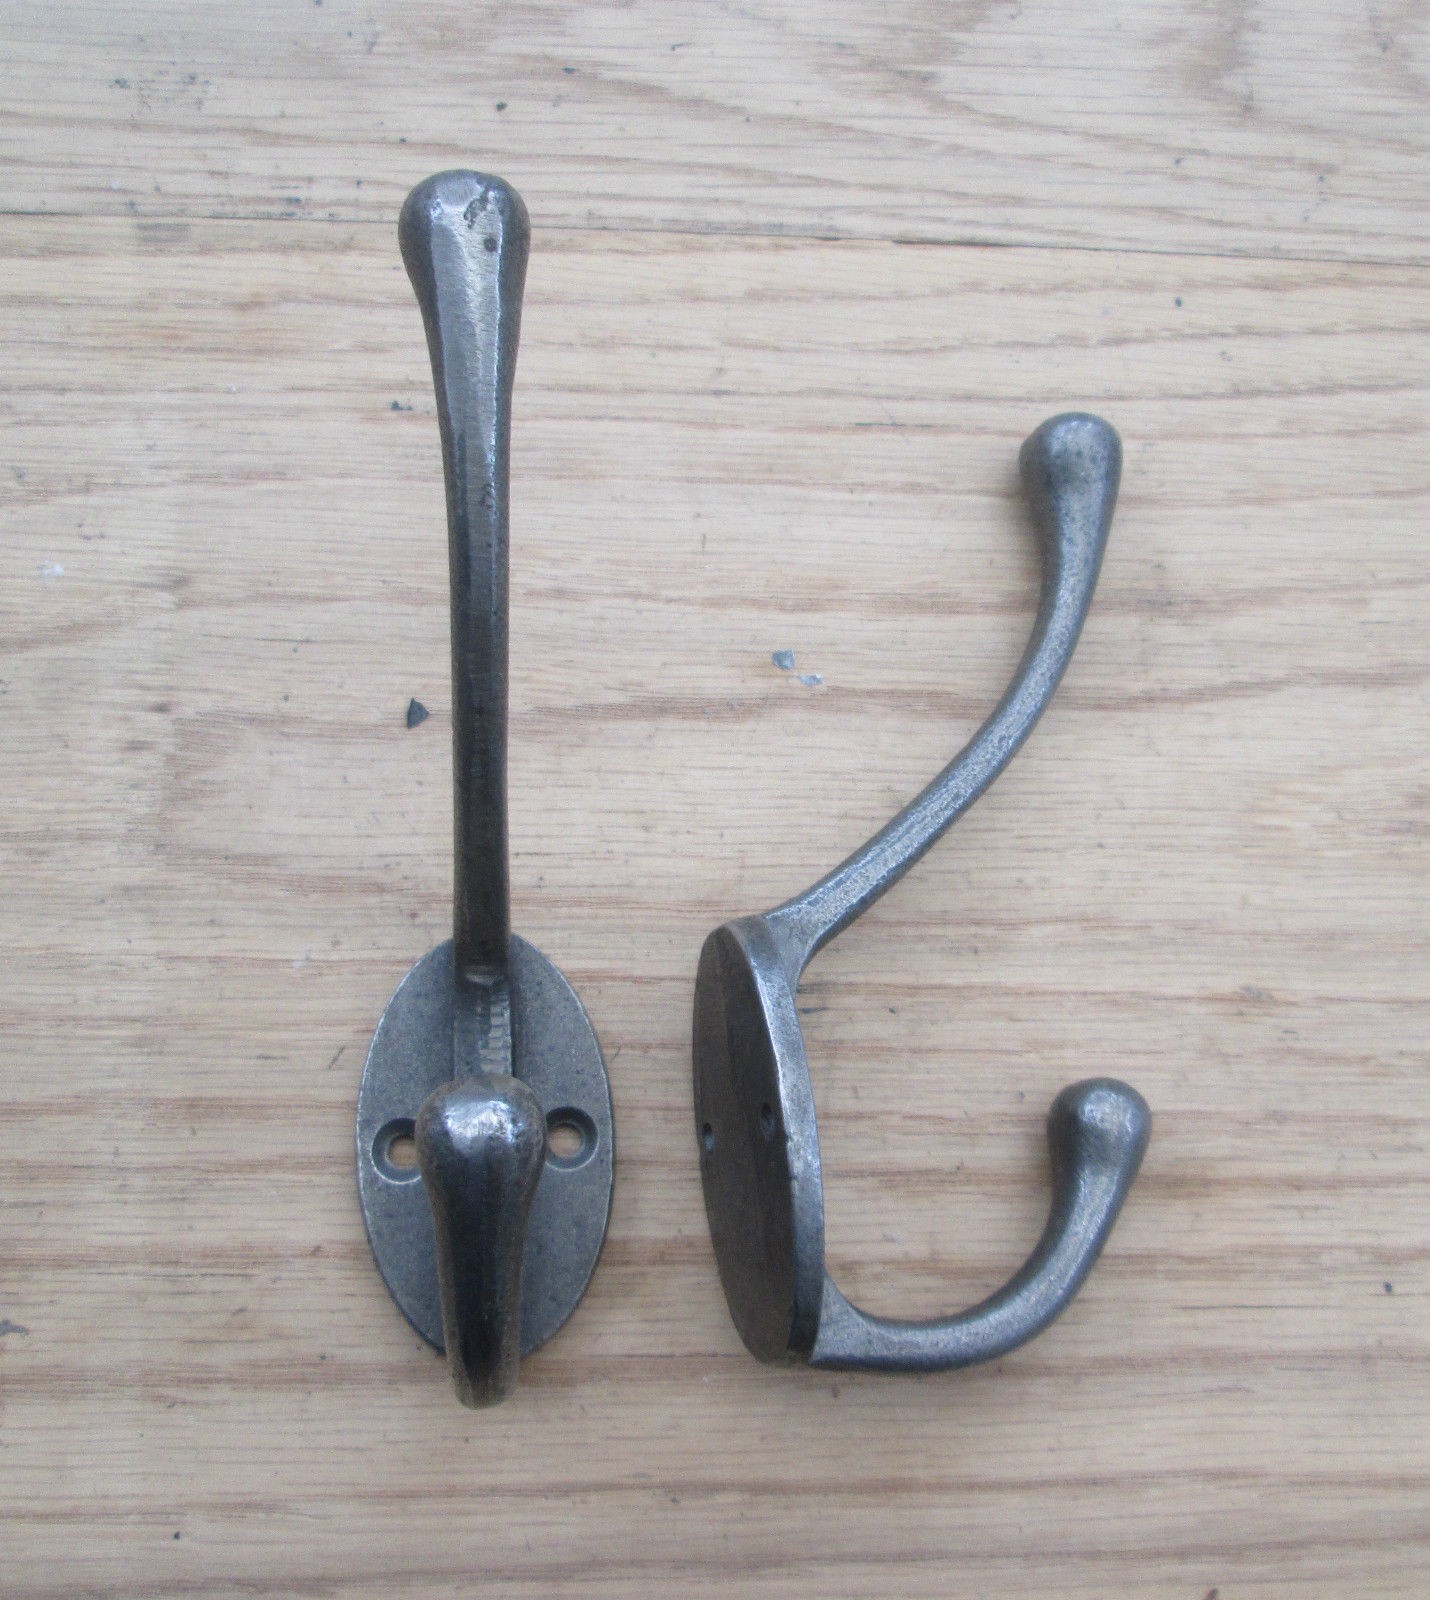 1 X CAST IRON COAT HOOK TRADITIONAL ANTIQUE VICTORIAN STYLE ...